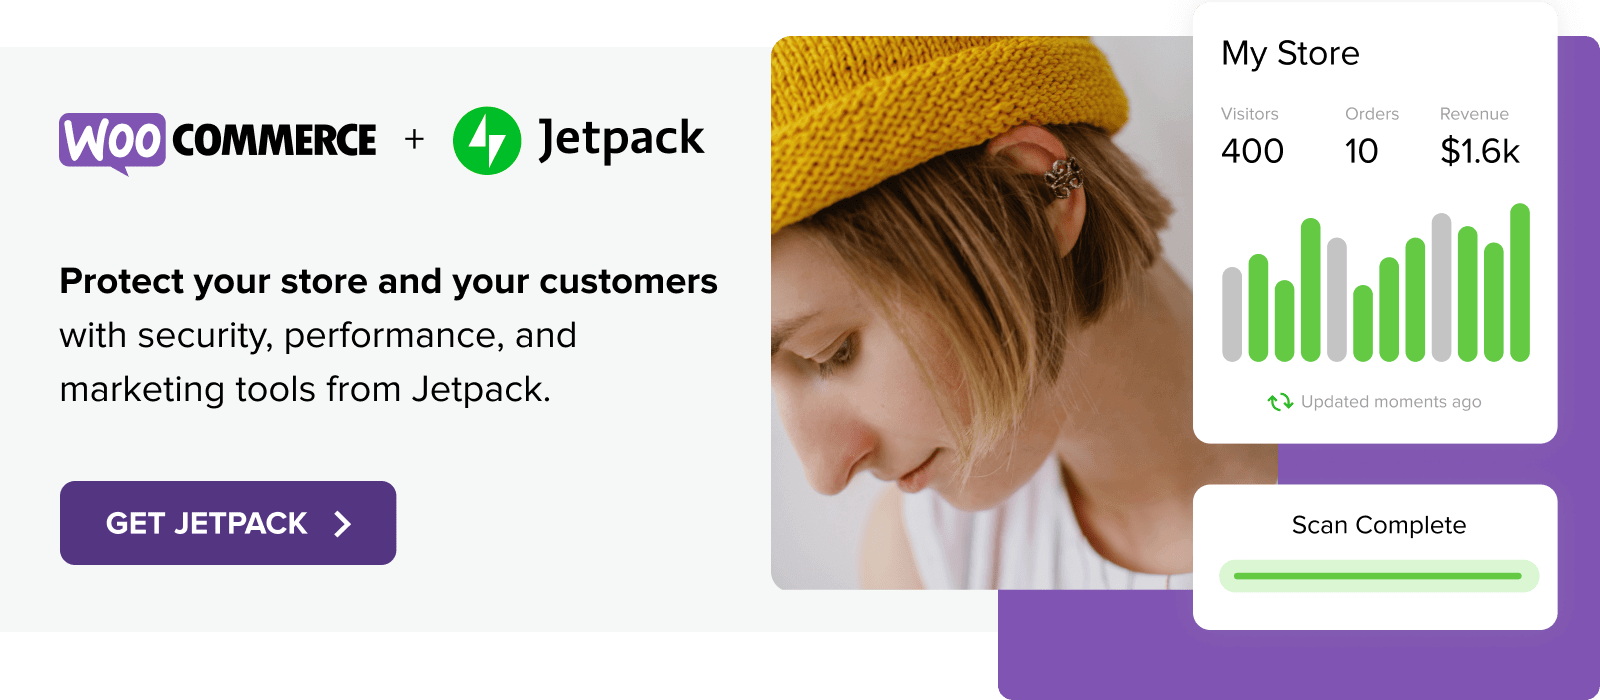 Jetpack Backup with Woocommerce